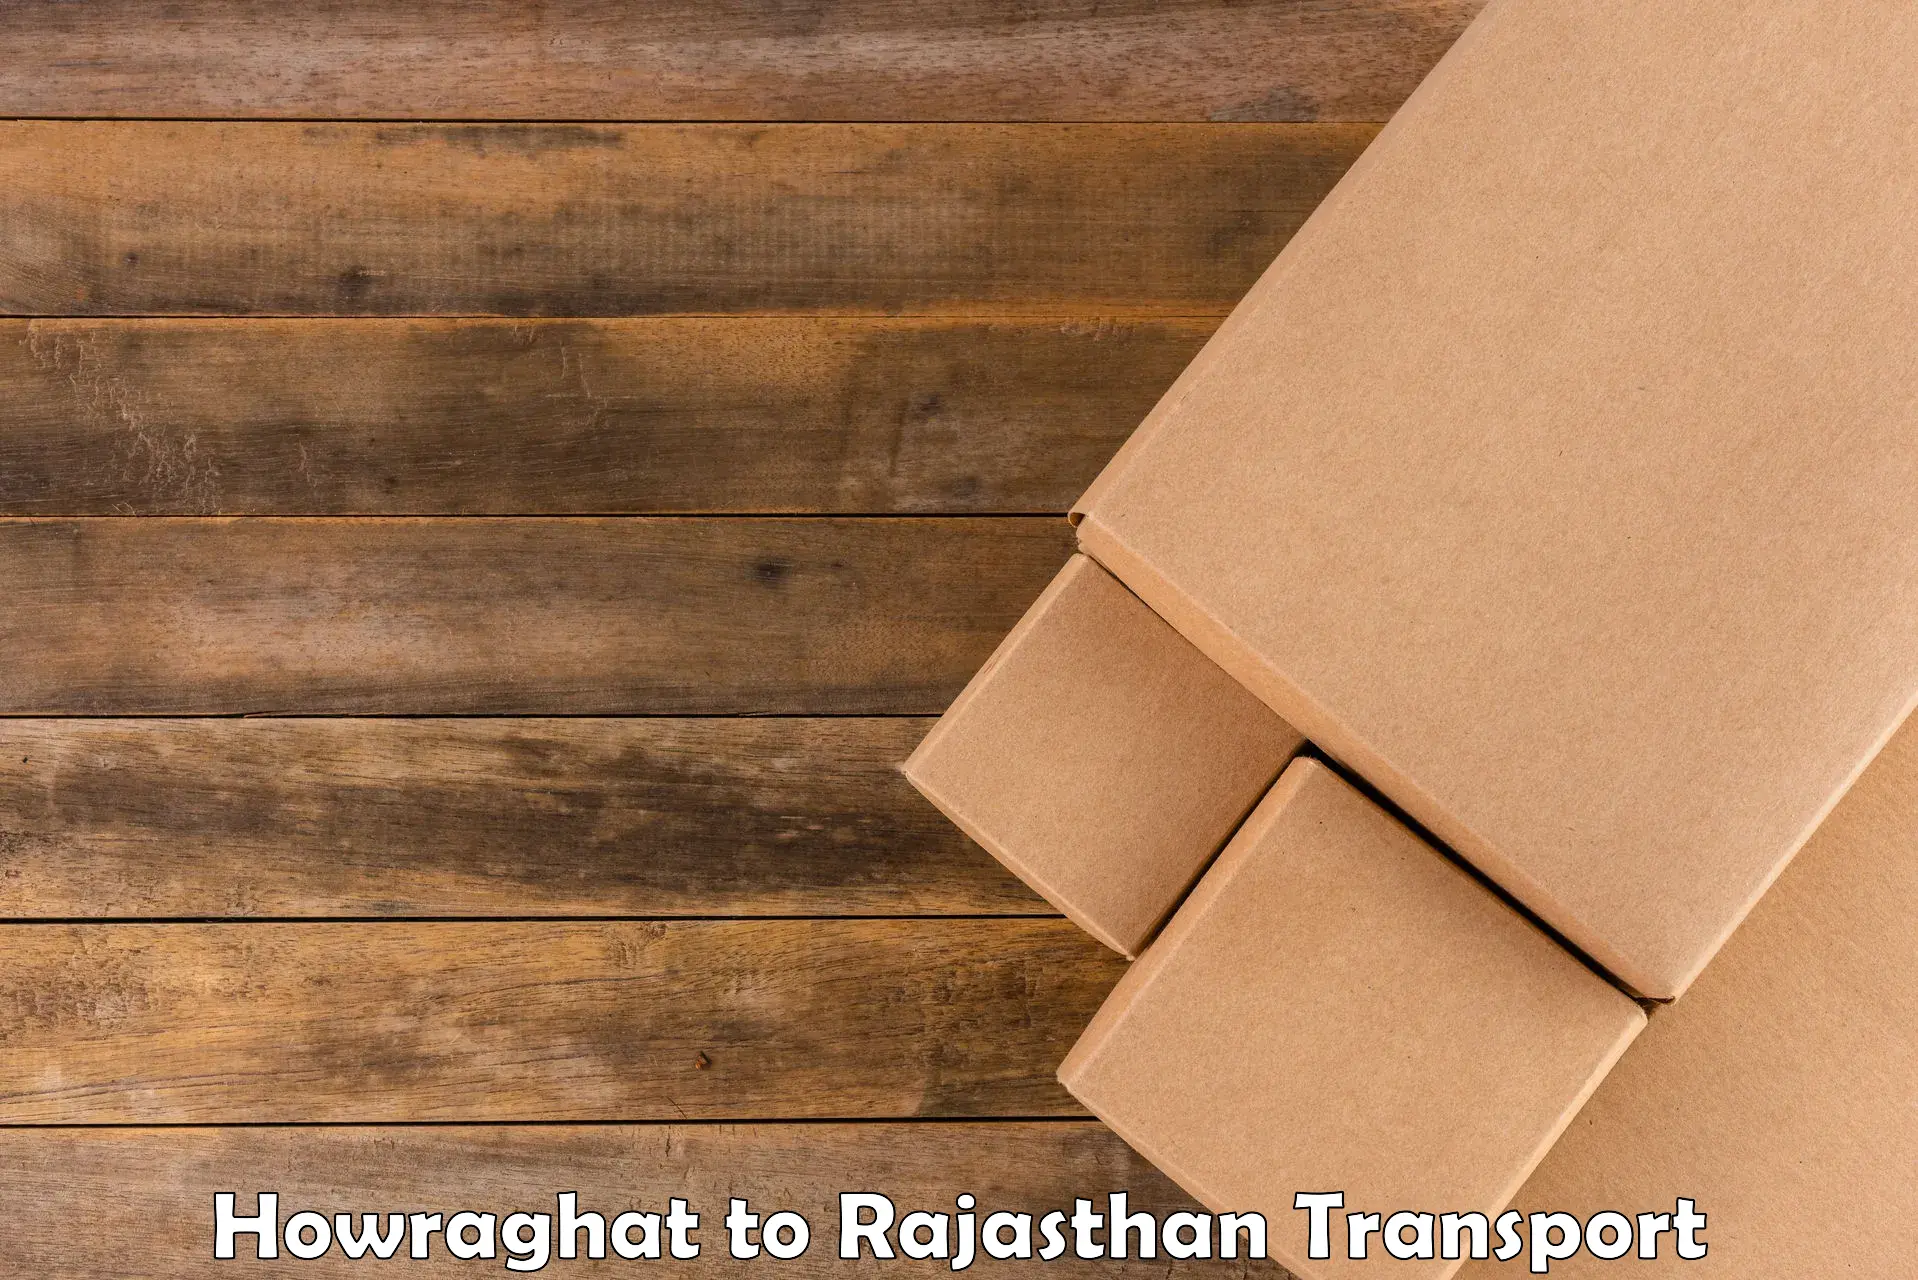 Scooty transport charges Howraghat to Ghatol